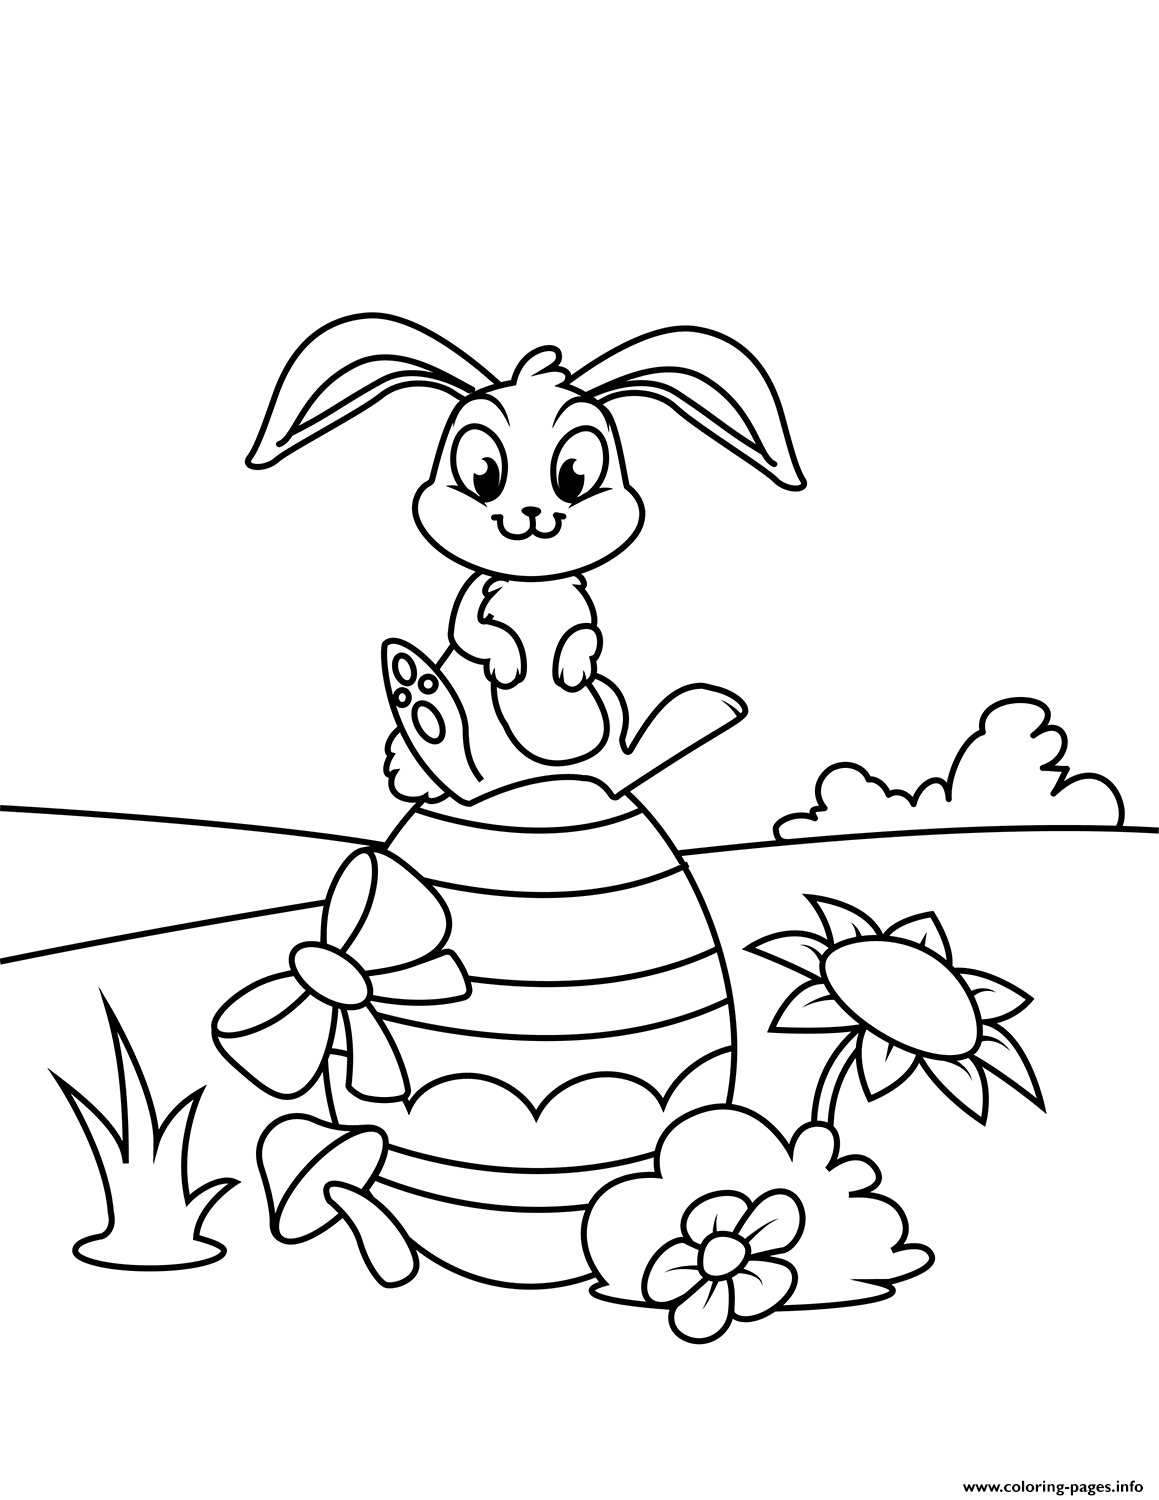 Cute Bunny Sitting On Easter Egg coloring